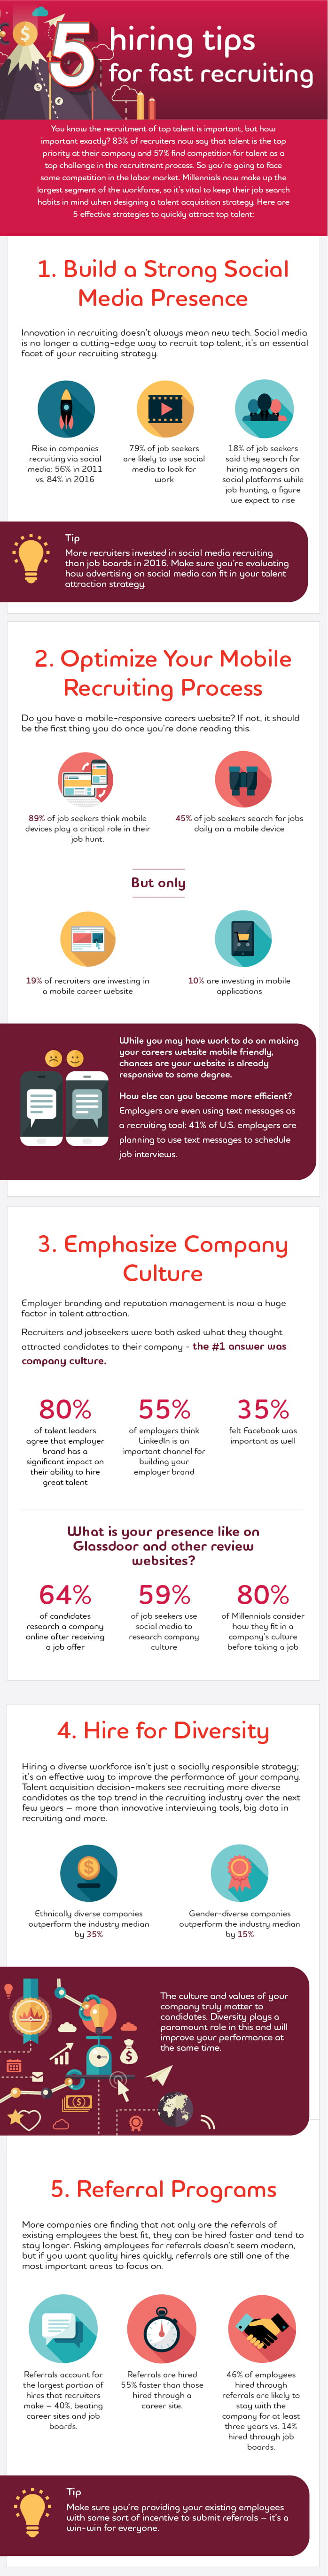 Infographic that shares the best and most innovative ways to recruit in the modern world.